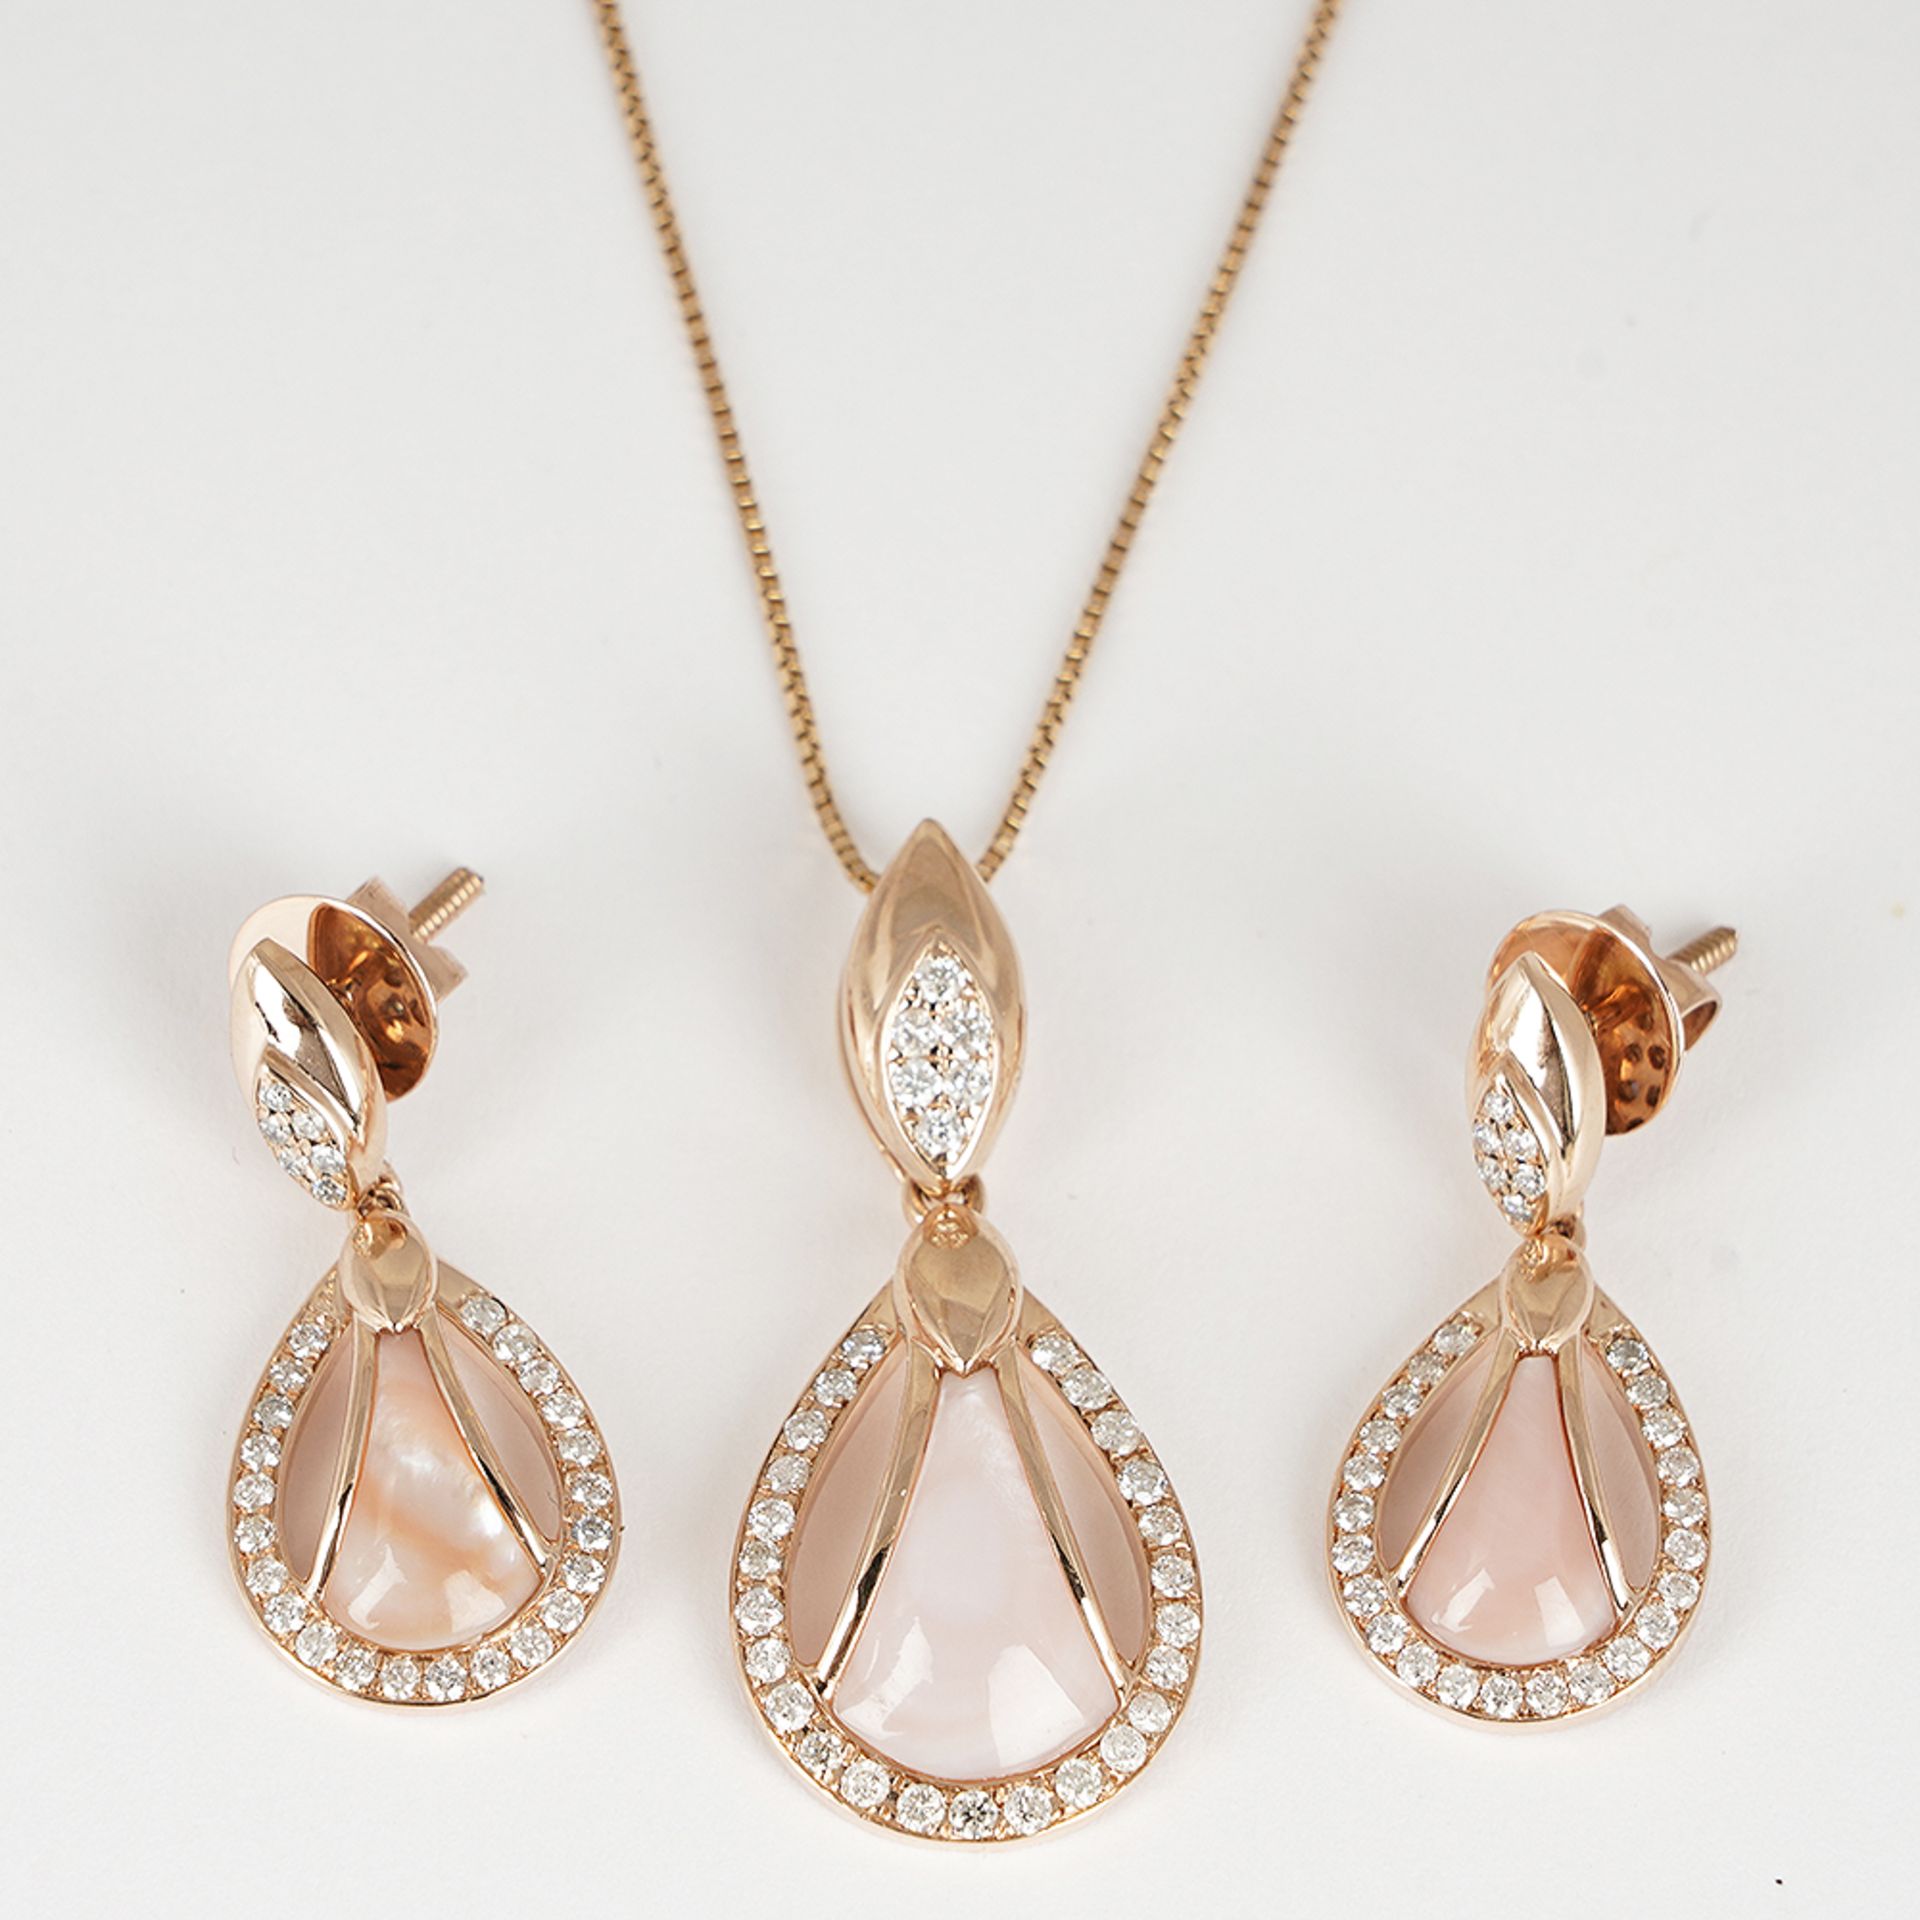 14 K / 585 Rose Gold Diamond & Mother of Pearl Pendant Necklace Set - Image 2 of 7